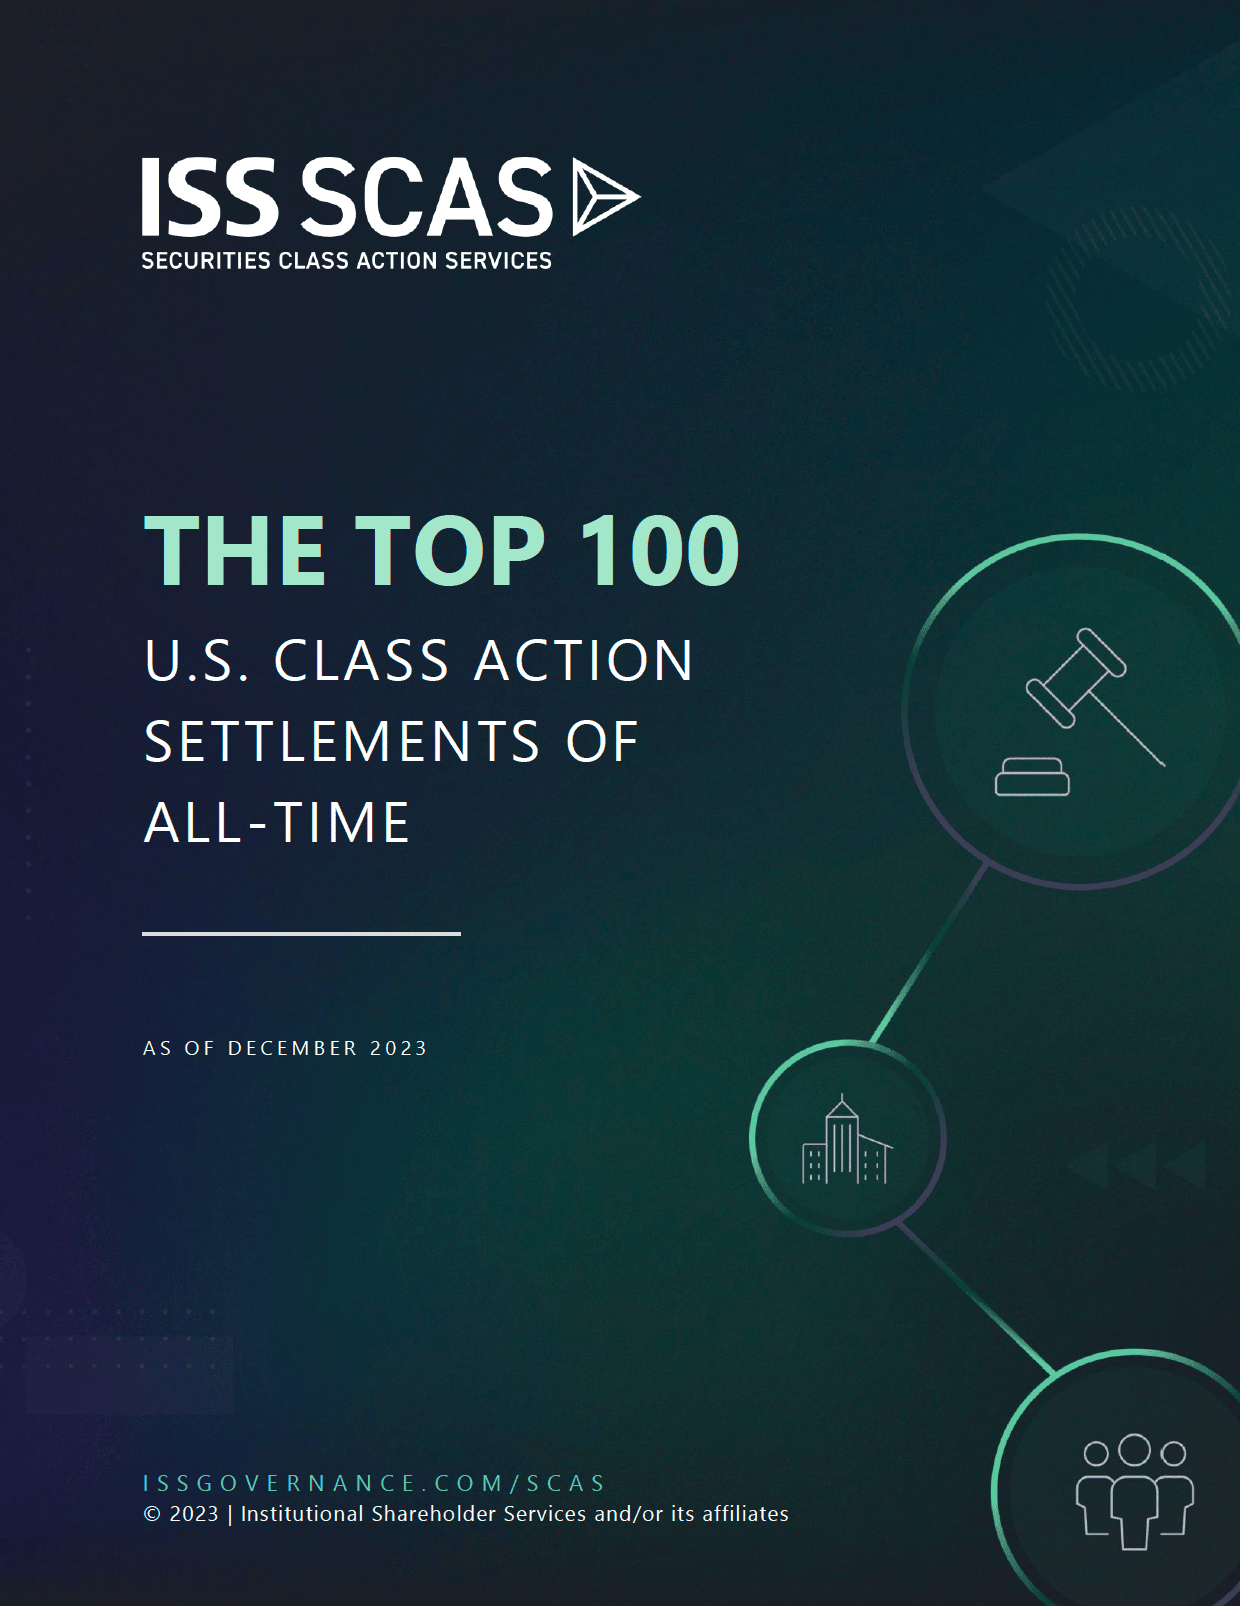 iss-scas-the-top-100-us-class-settlements-of-all-time-cover.png